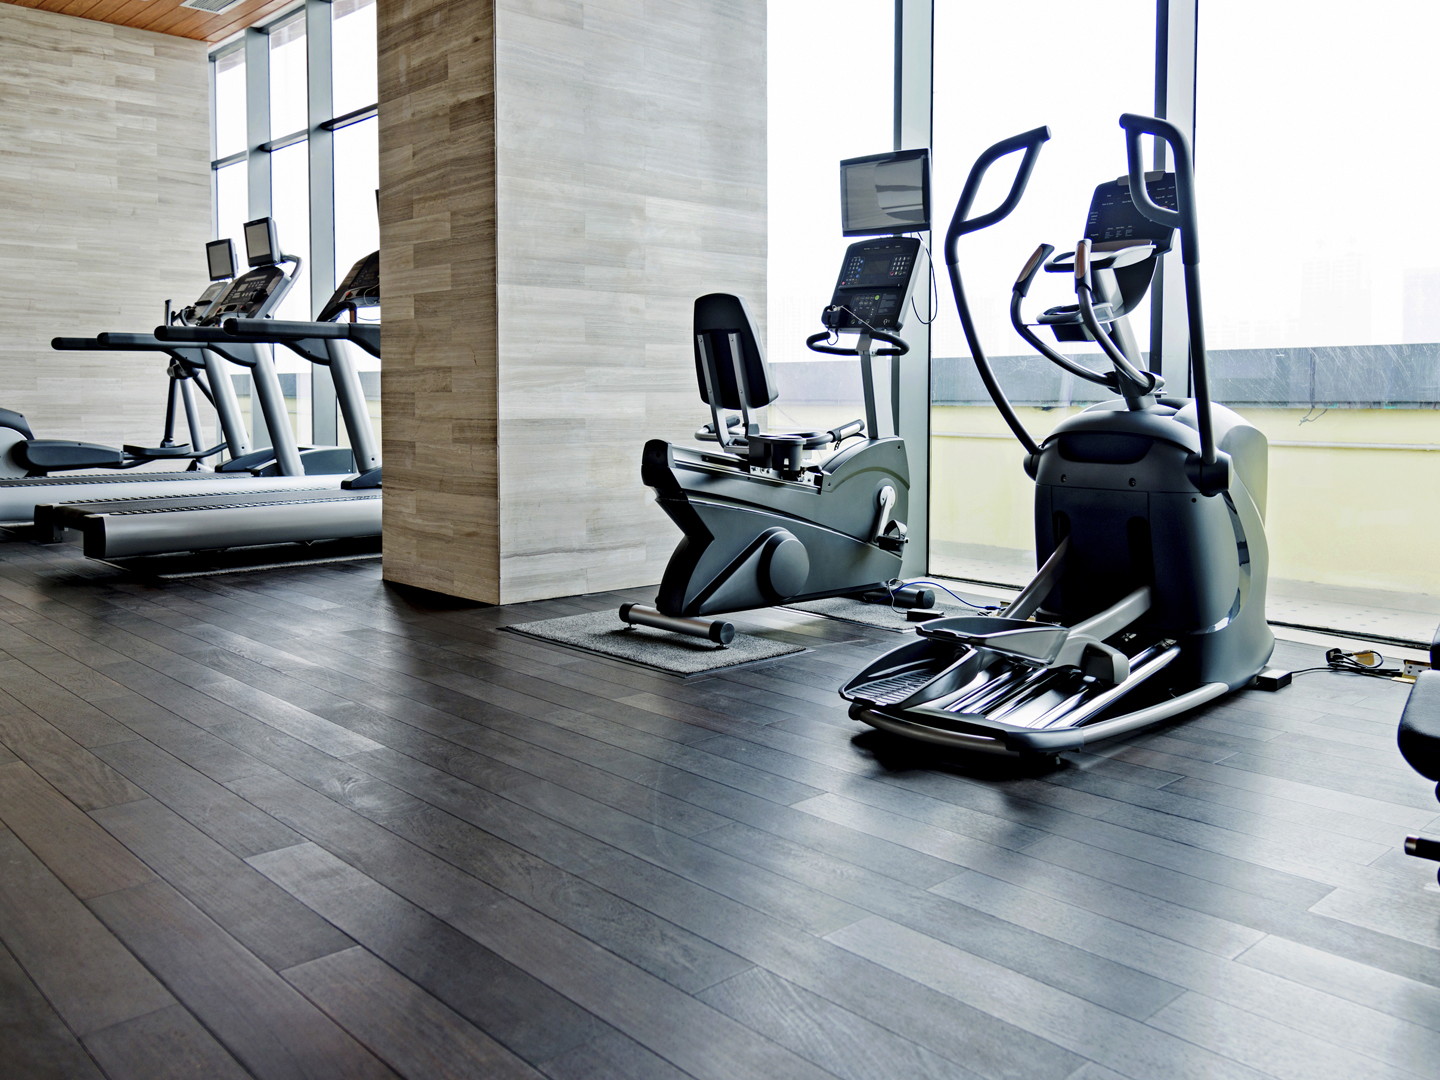 Empty gym room with group of exercise machine.